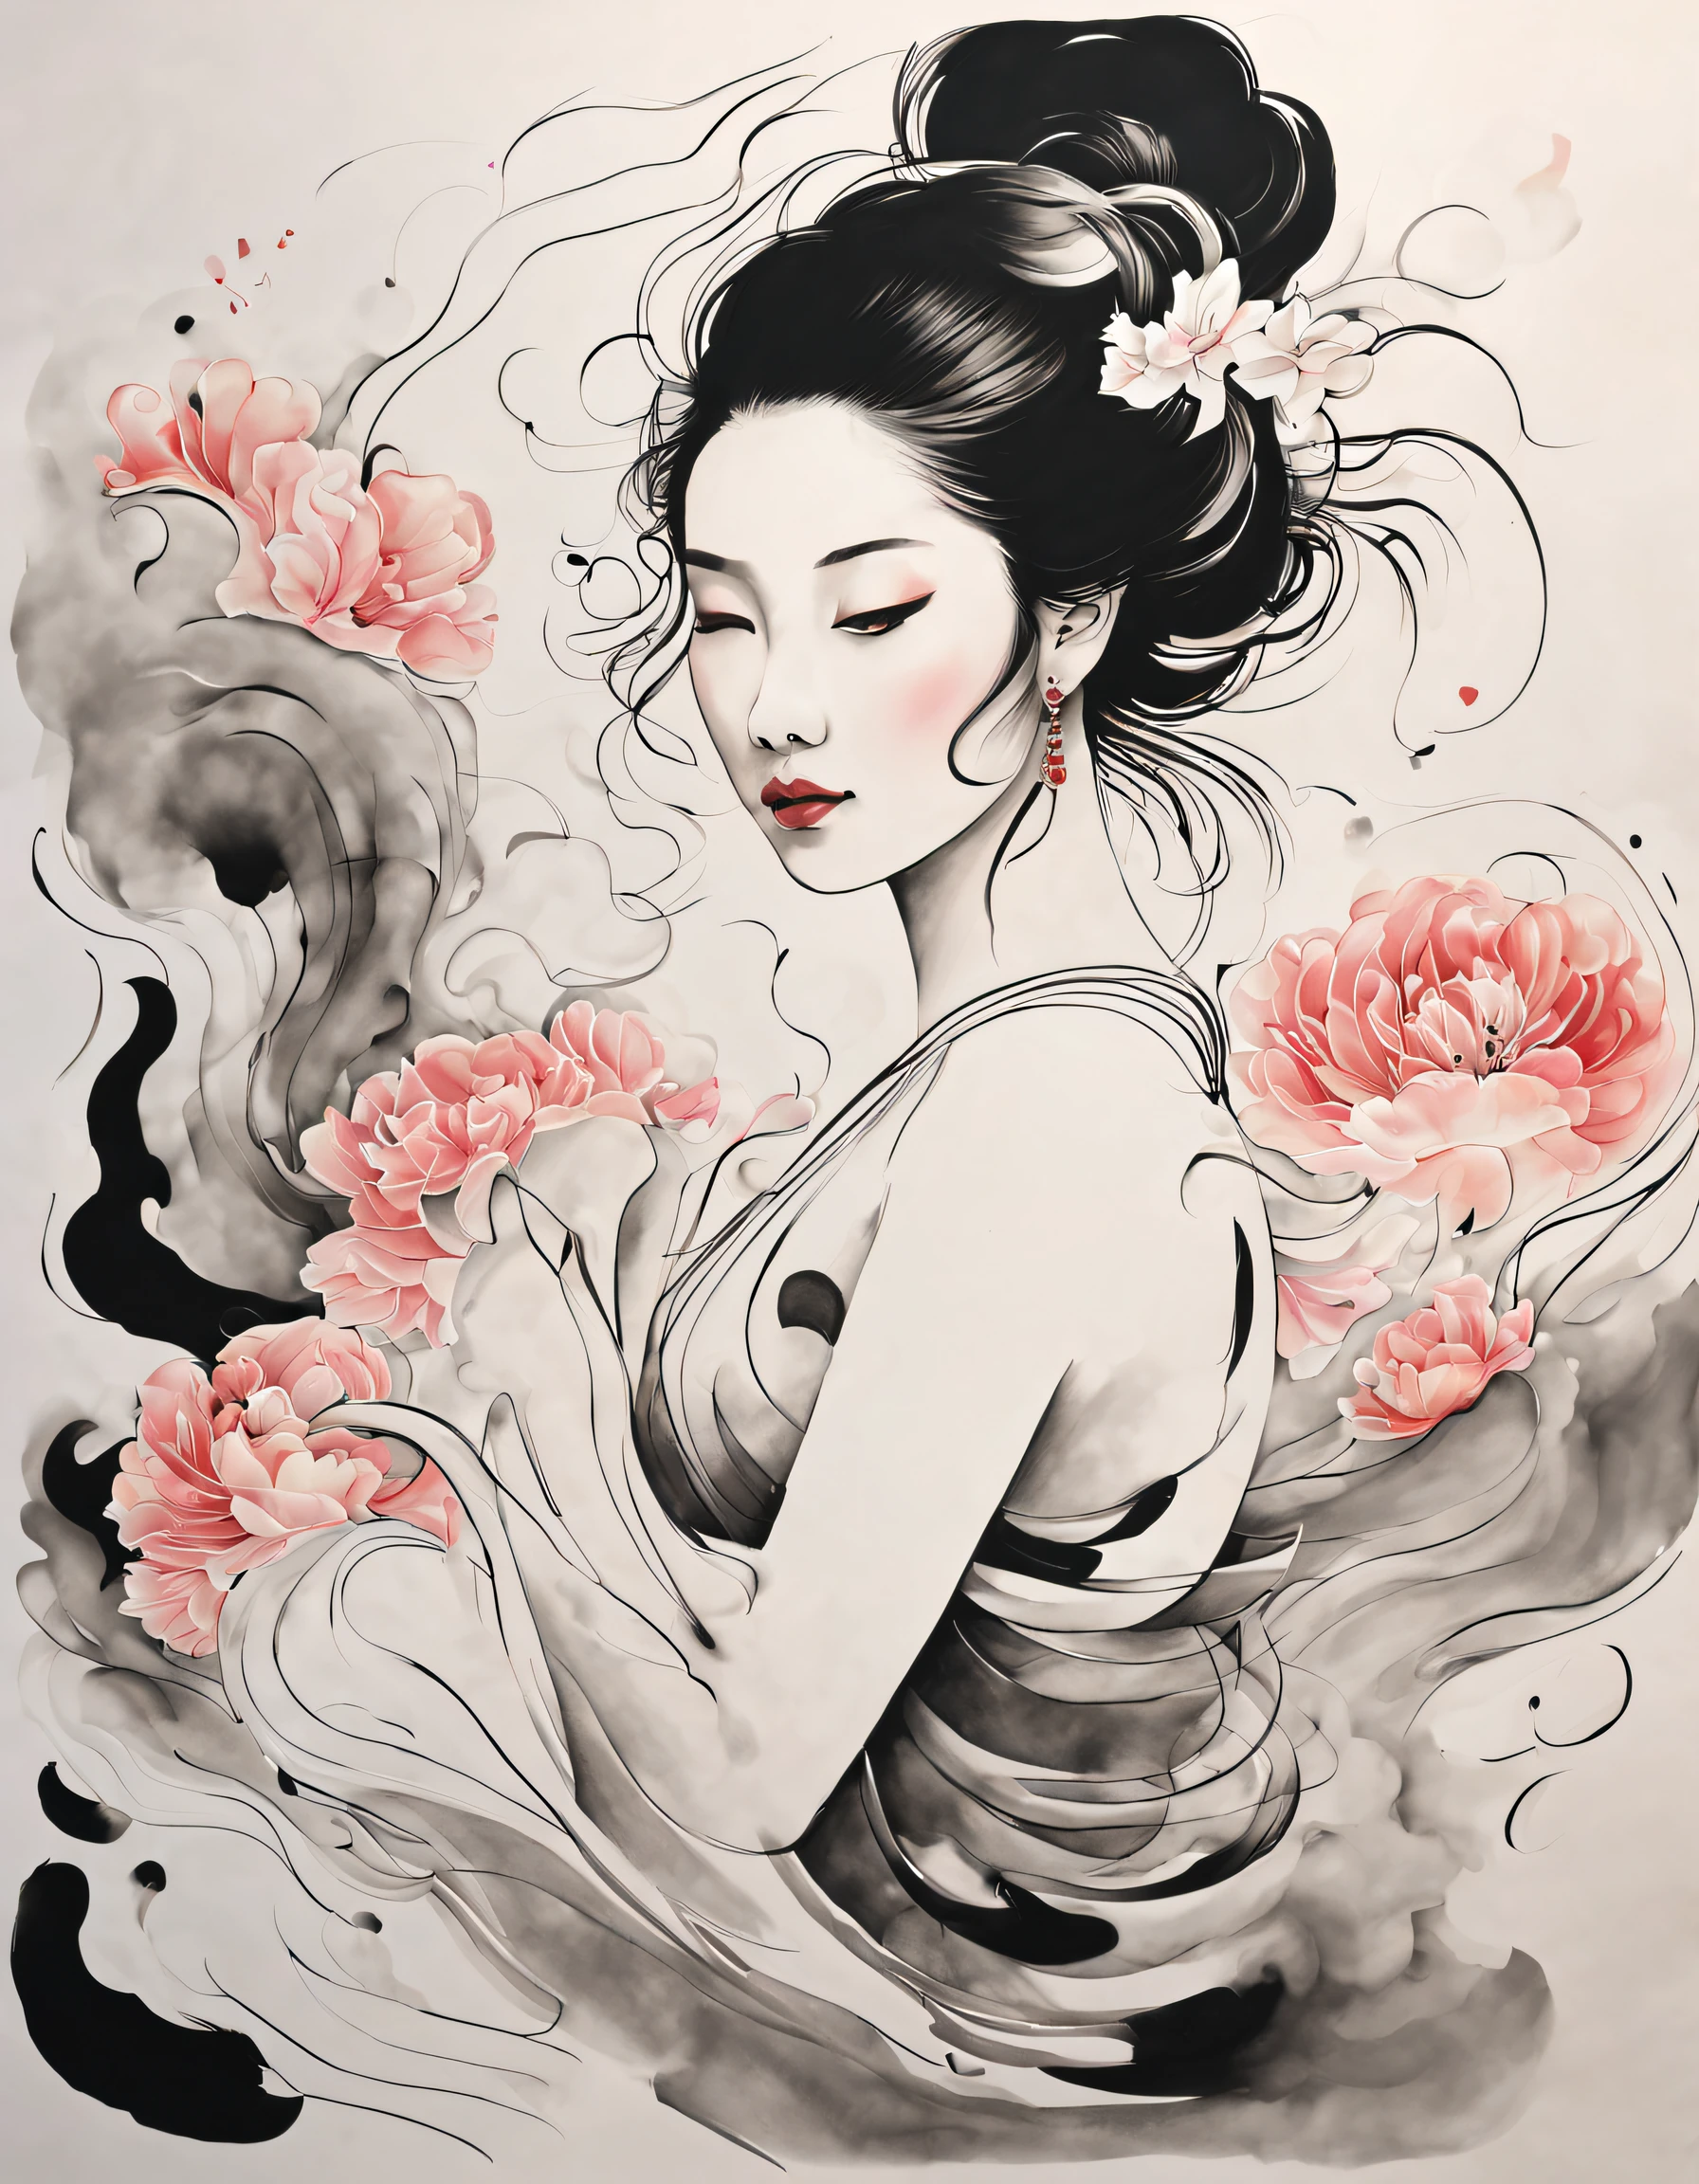 Chinese traditional ink body art style, (Use simple lines to outline a woman’s graceful figure），sweetheart&#39;Come back, undulating lines, Thick and thin lines, (body art）,
line art, Black and white painting,character drawing,line art,lyrical abstraction, Fountain Pen Art,Gel Pen,crayon art,